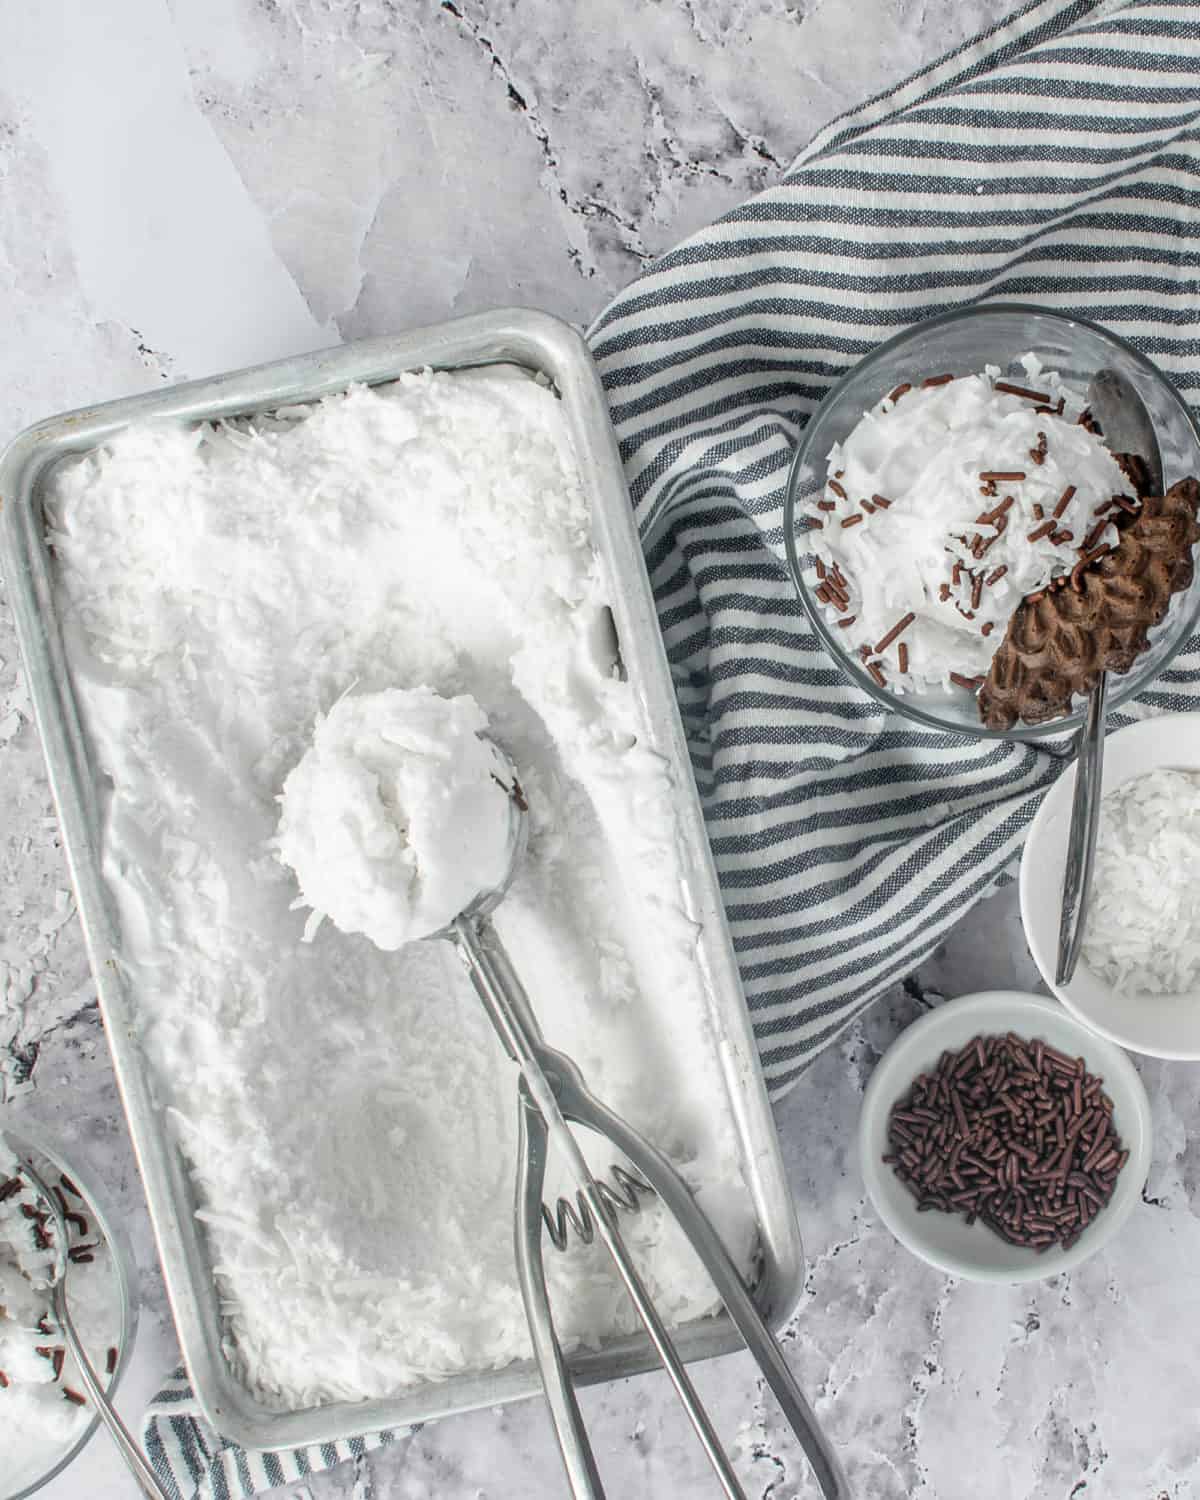 Homemade sorbet with coconut on a table.